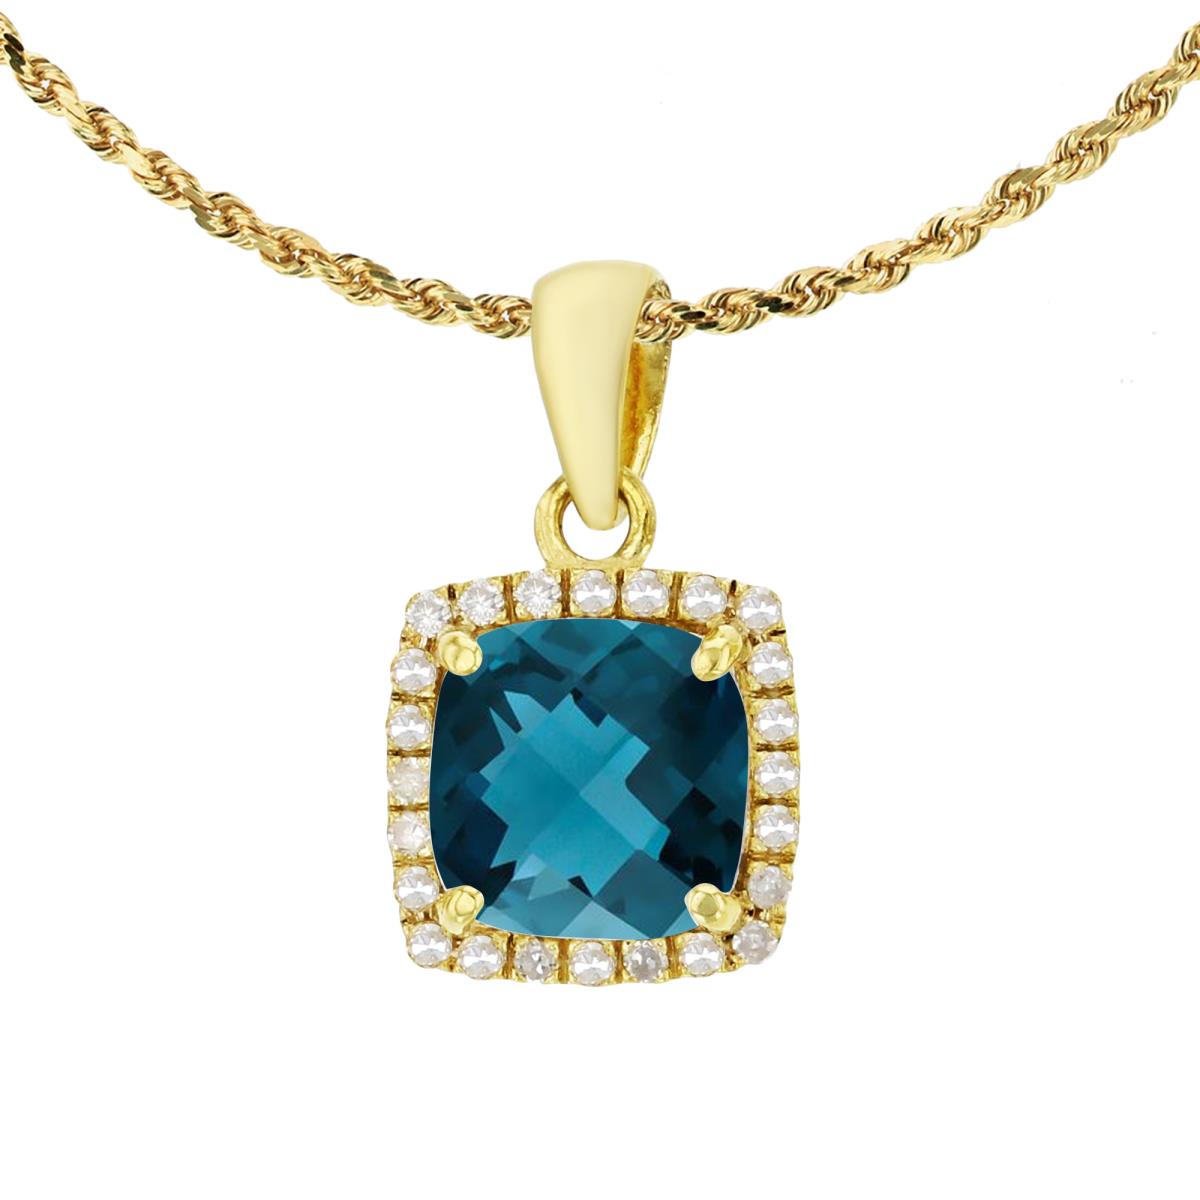 10K Yellow Gold 7mm Cushion London Blue Topaz & 0.12 CTTW Diamond Halo 18" Rope Chain Necklace